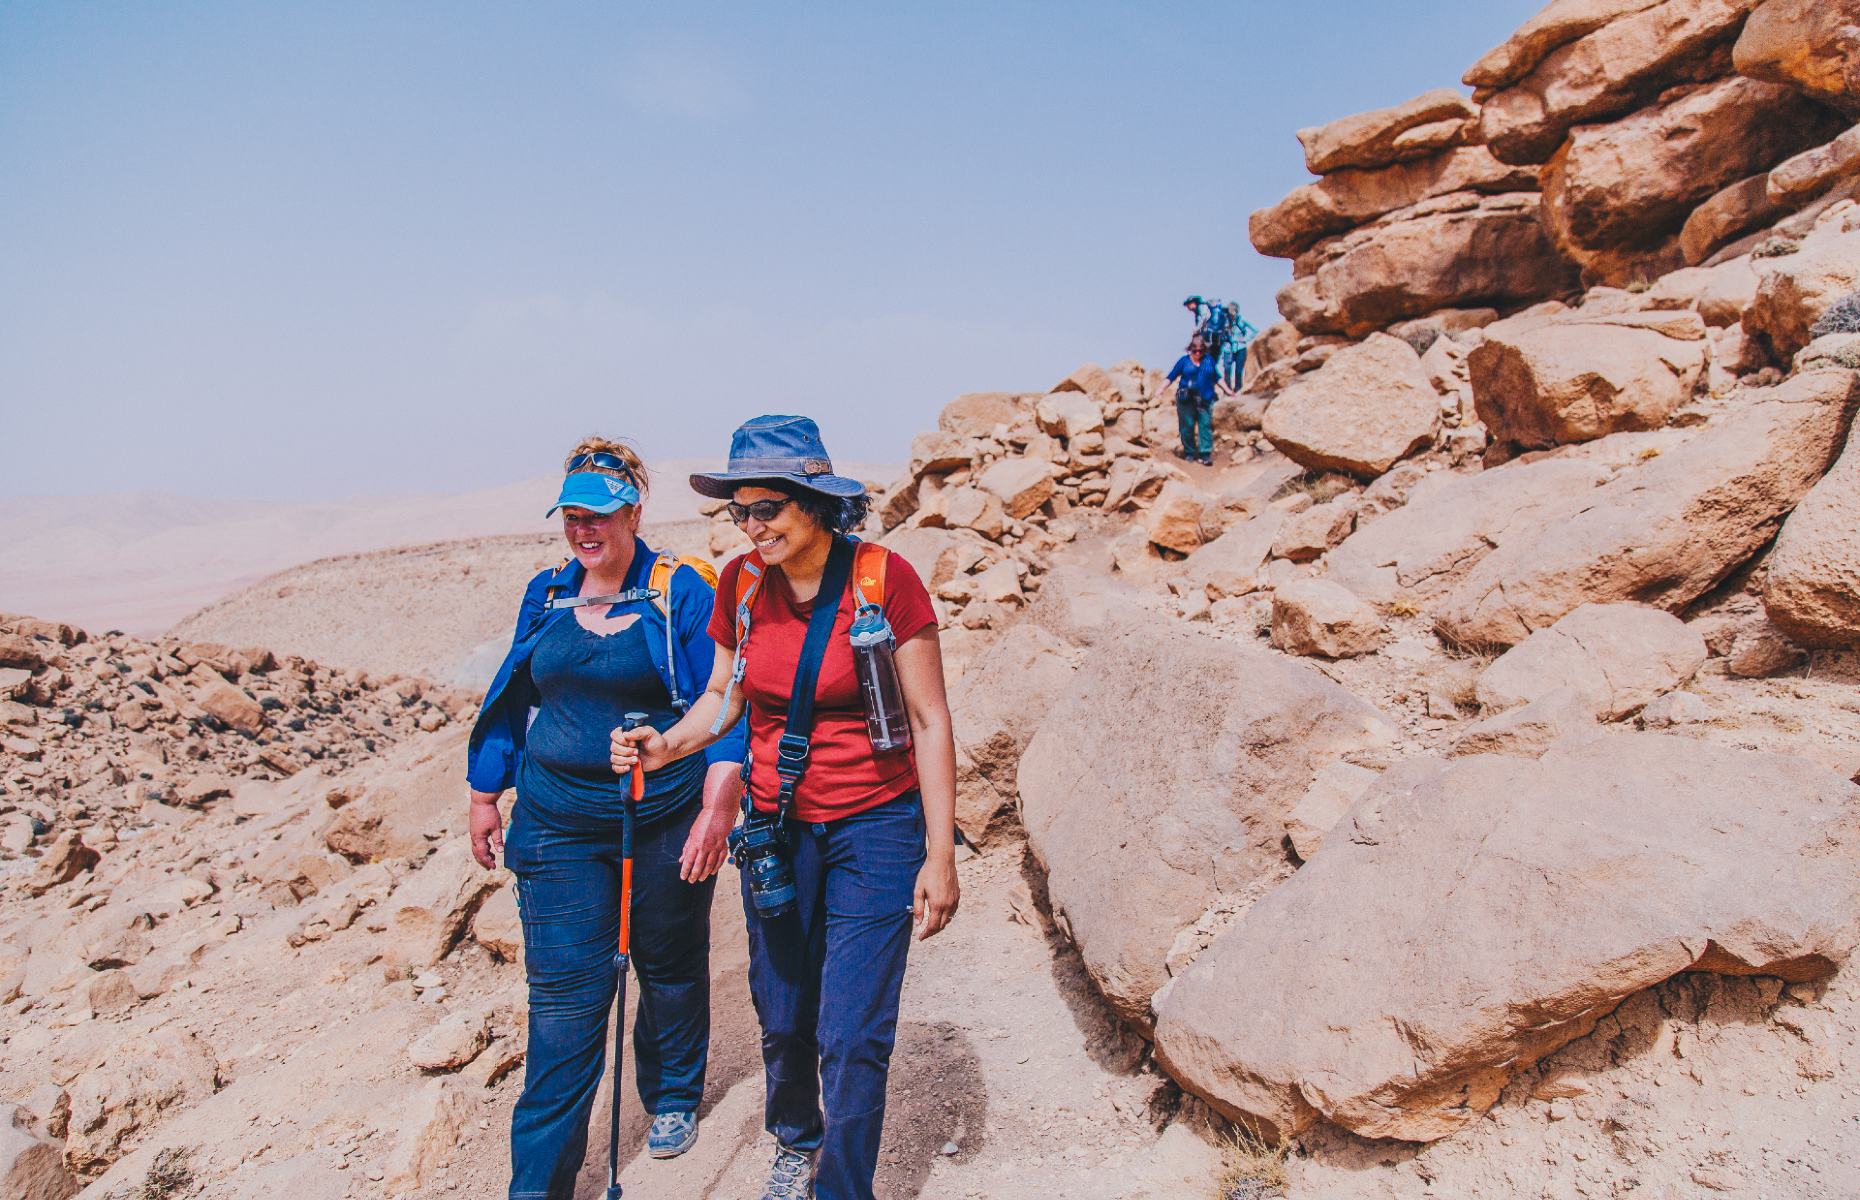 Women hiking in the Atlas Mountains of Morocco (Image courtesy Intrepid Travel)